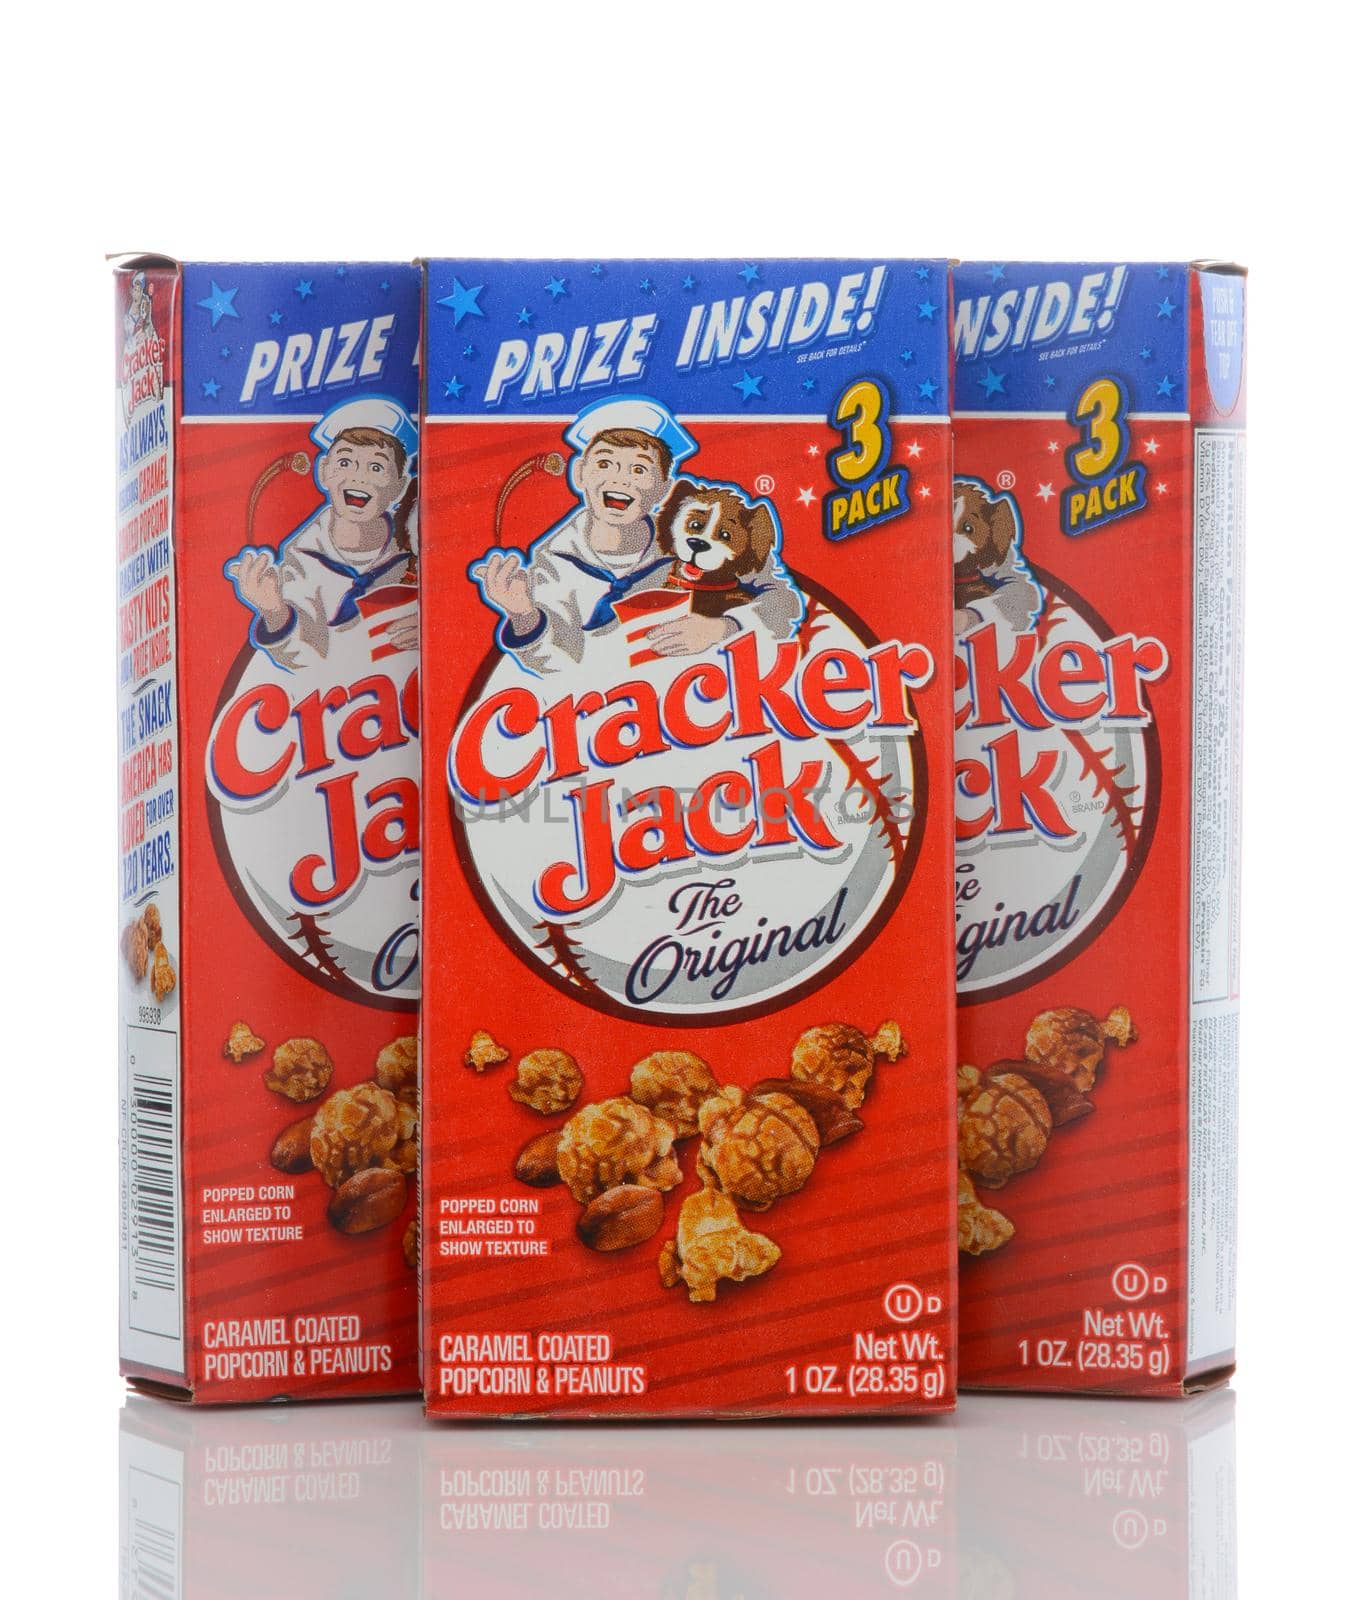 Three boxes of Cracker Jack snack consisting of molasses flavored, candy coated, popcorn and peanuts by sCukrov